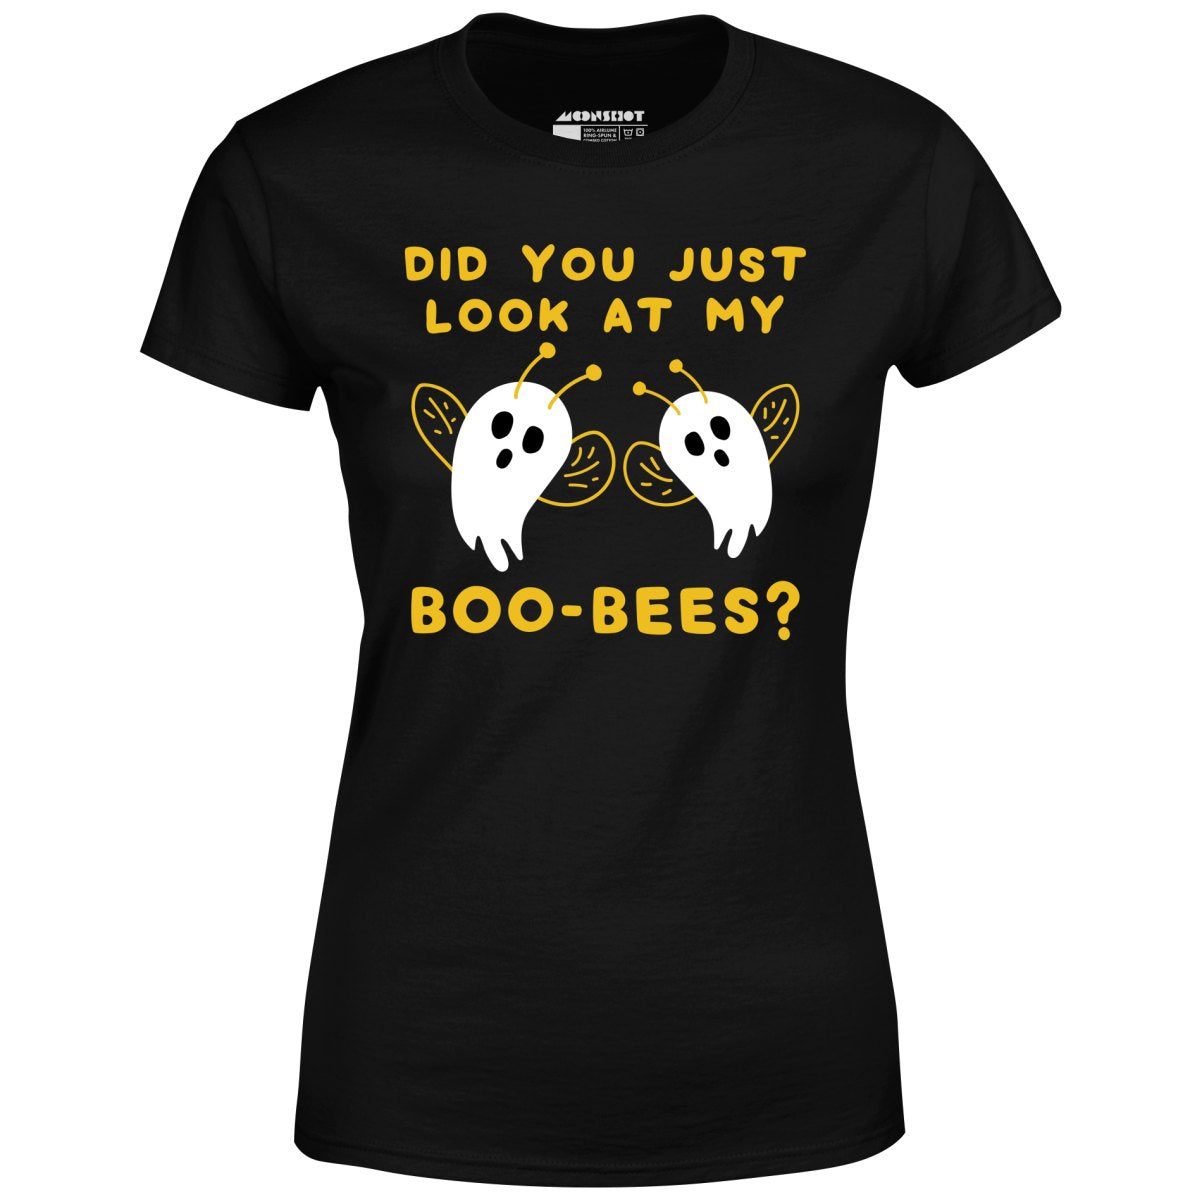 Did You Just Look At My Boo-Bees? - Women's T-Shirt